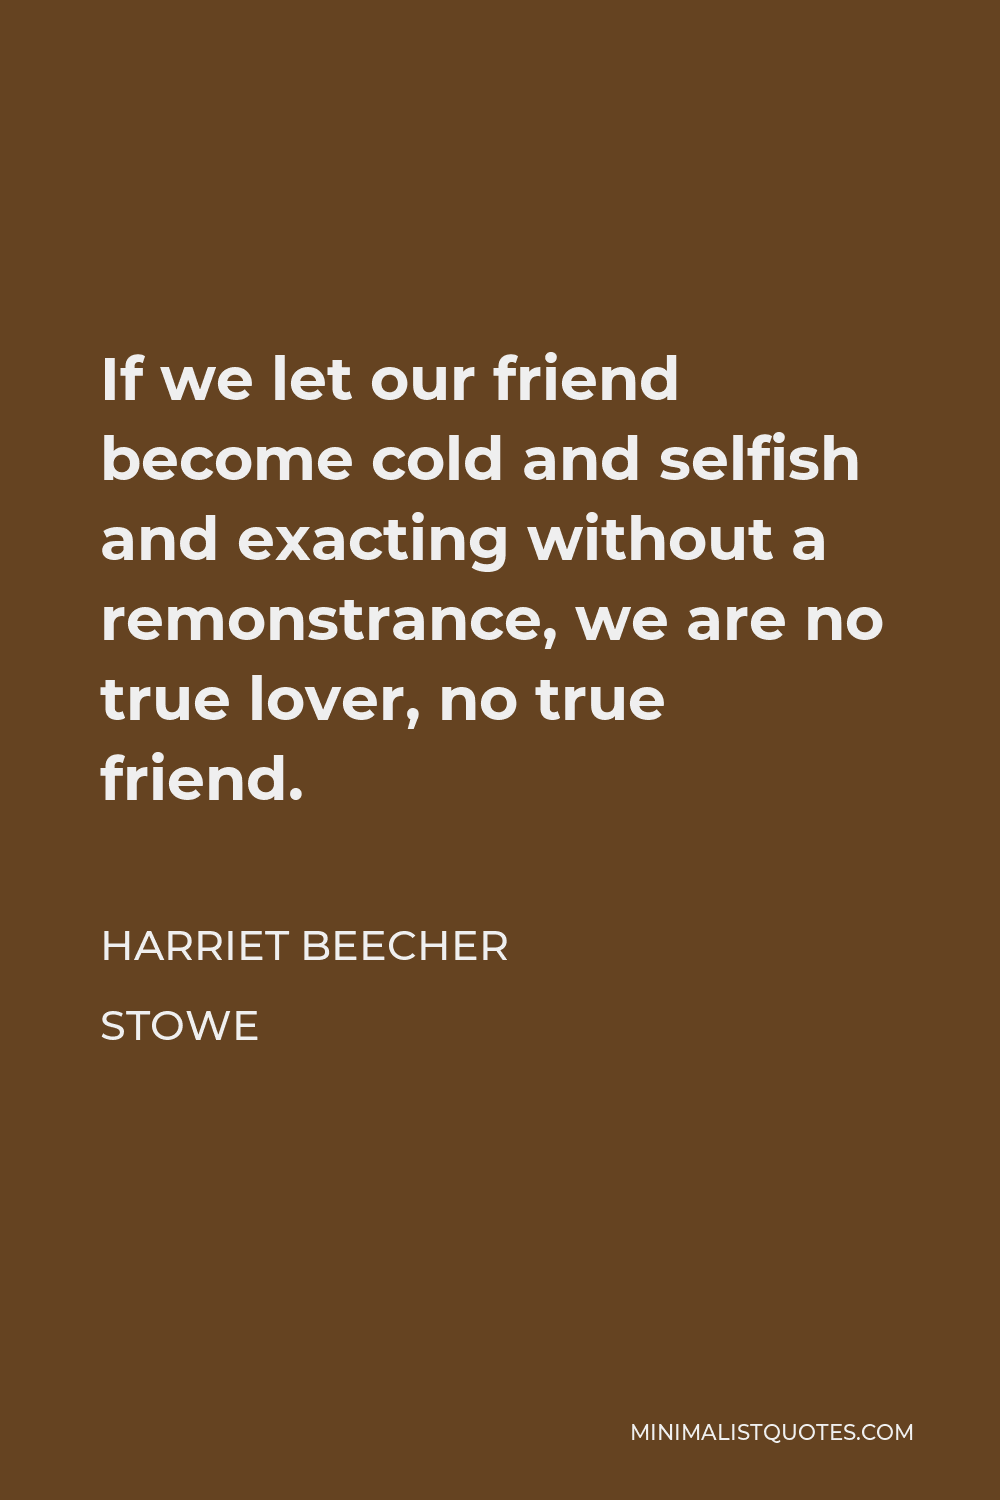 Harriet Beecher Stowe Quote - If we let our friend become cold and selfish and exacting without a remonstrance, we are no true lover, no true friend.